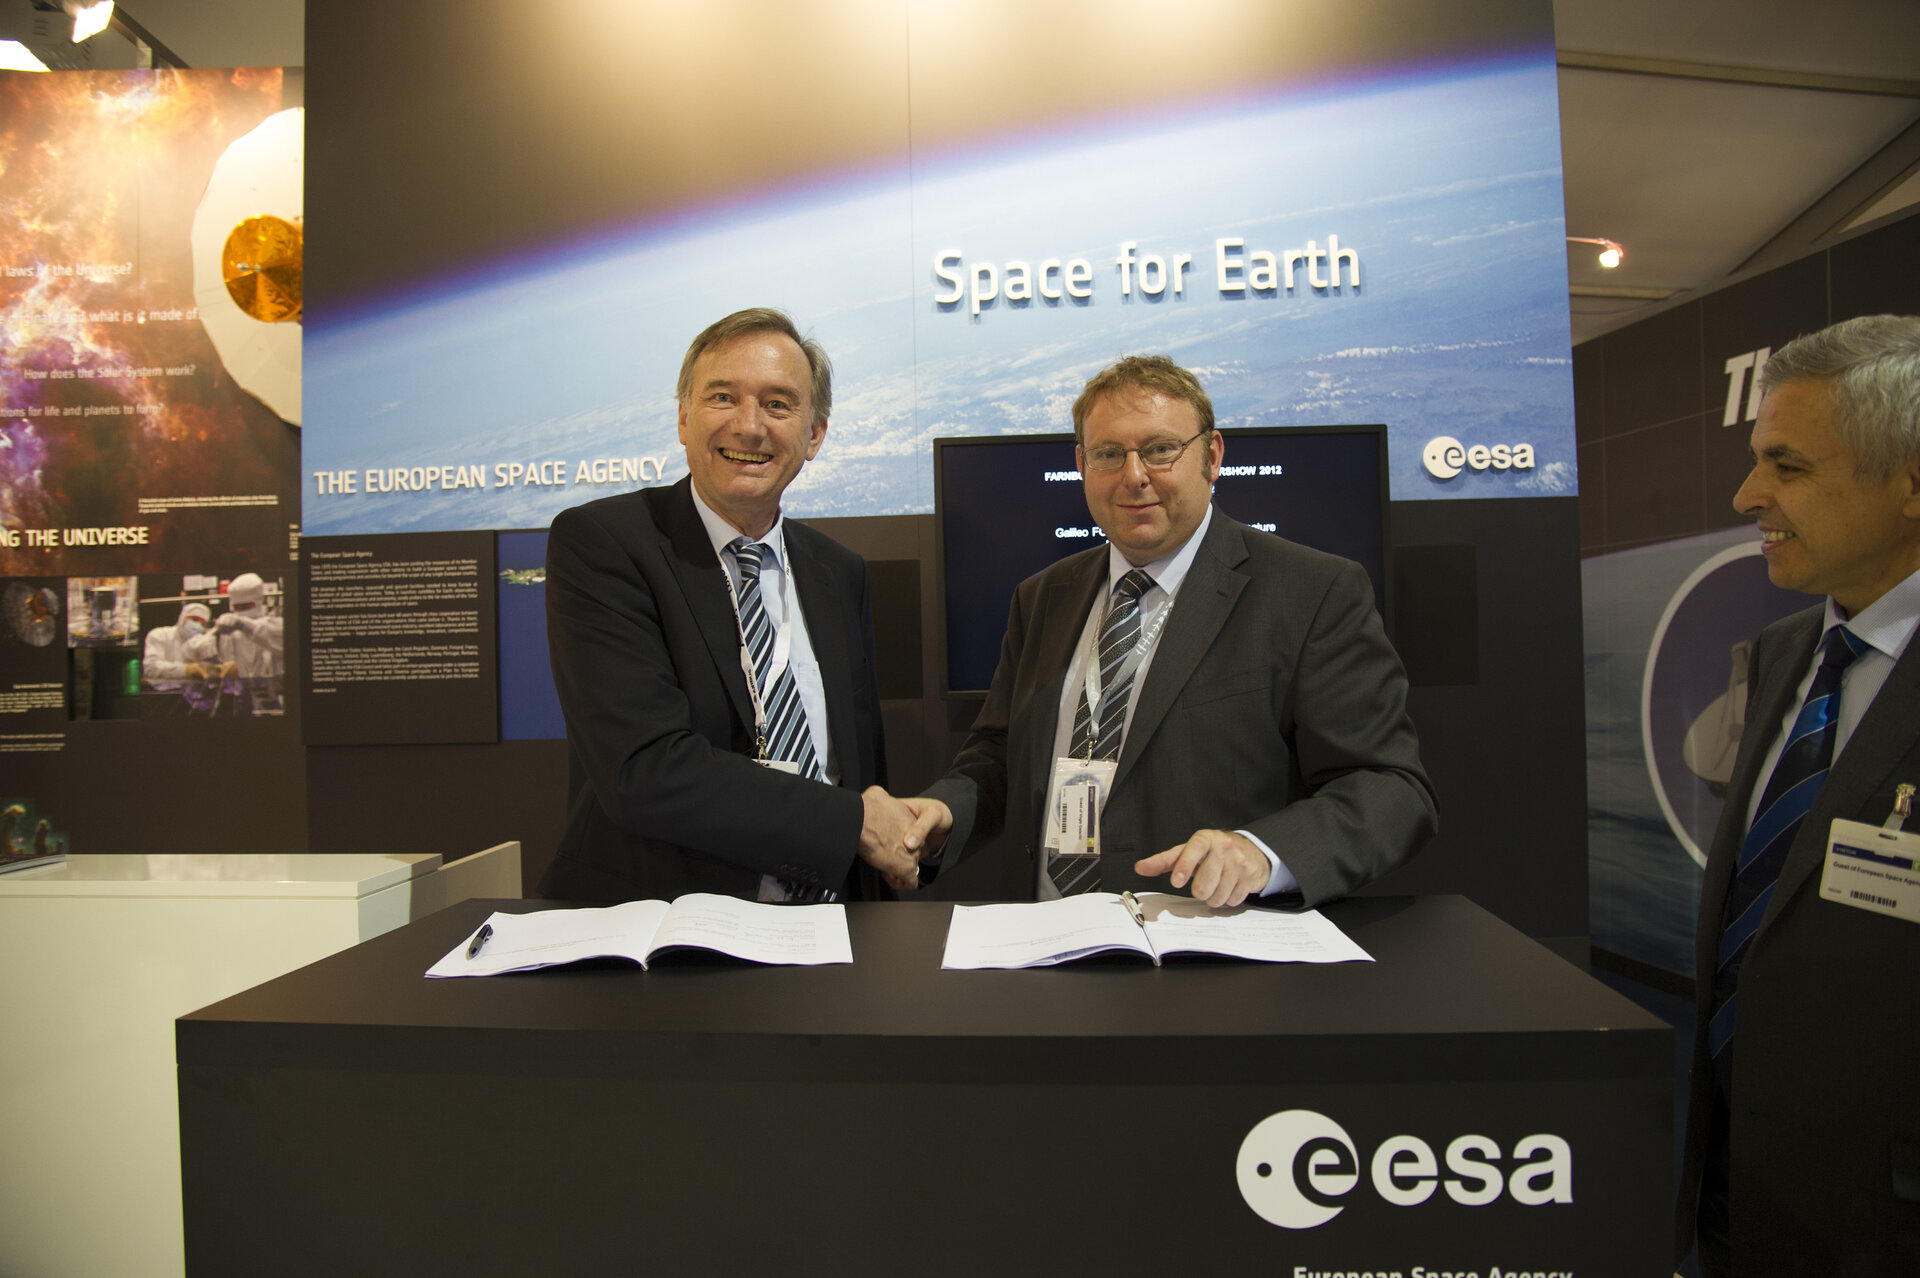 Contract Signature for Galileo Full Operational Capability Work Order 2, Farnborough airshow, 11 July 2012